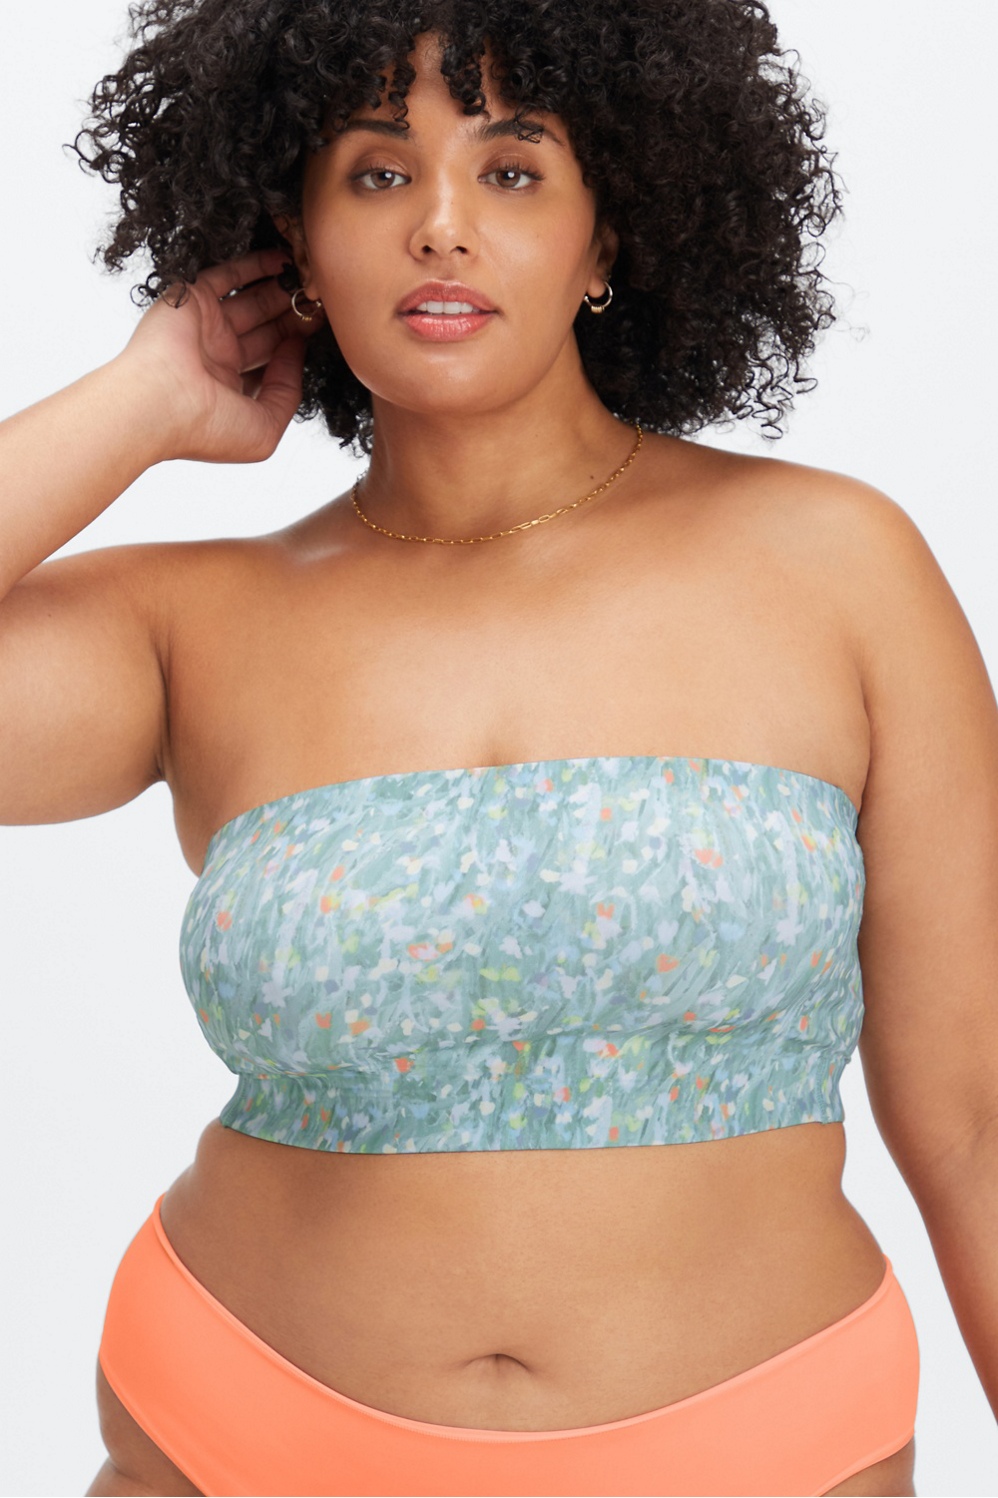 Abstract Swirl Crop Top / Colorful Plus-Size Bralette / Vibrant